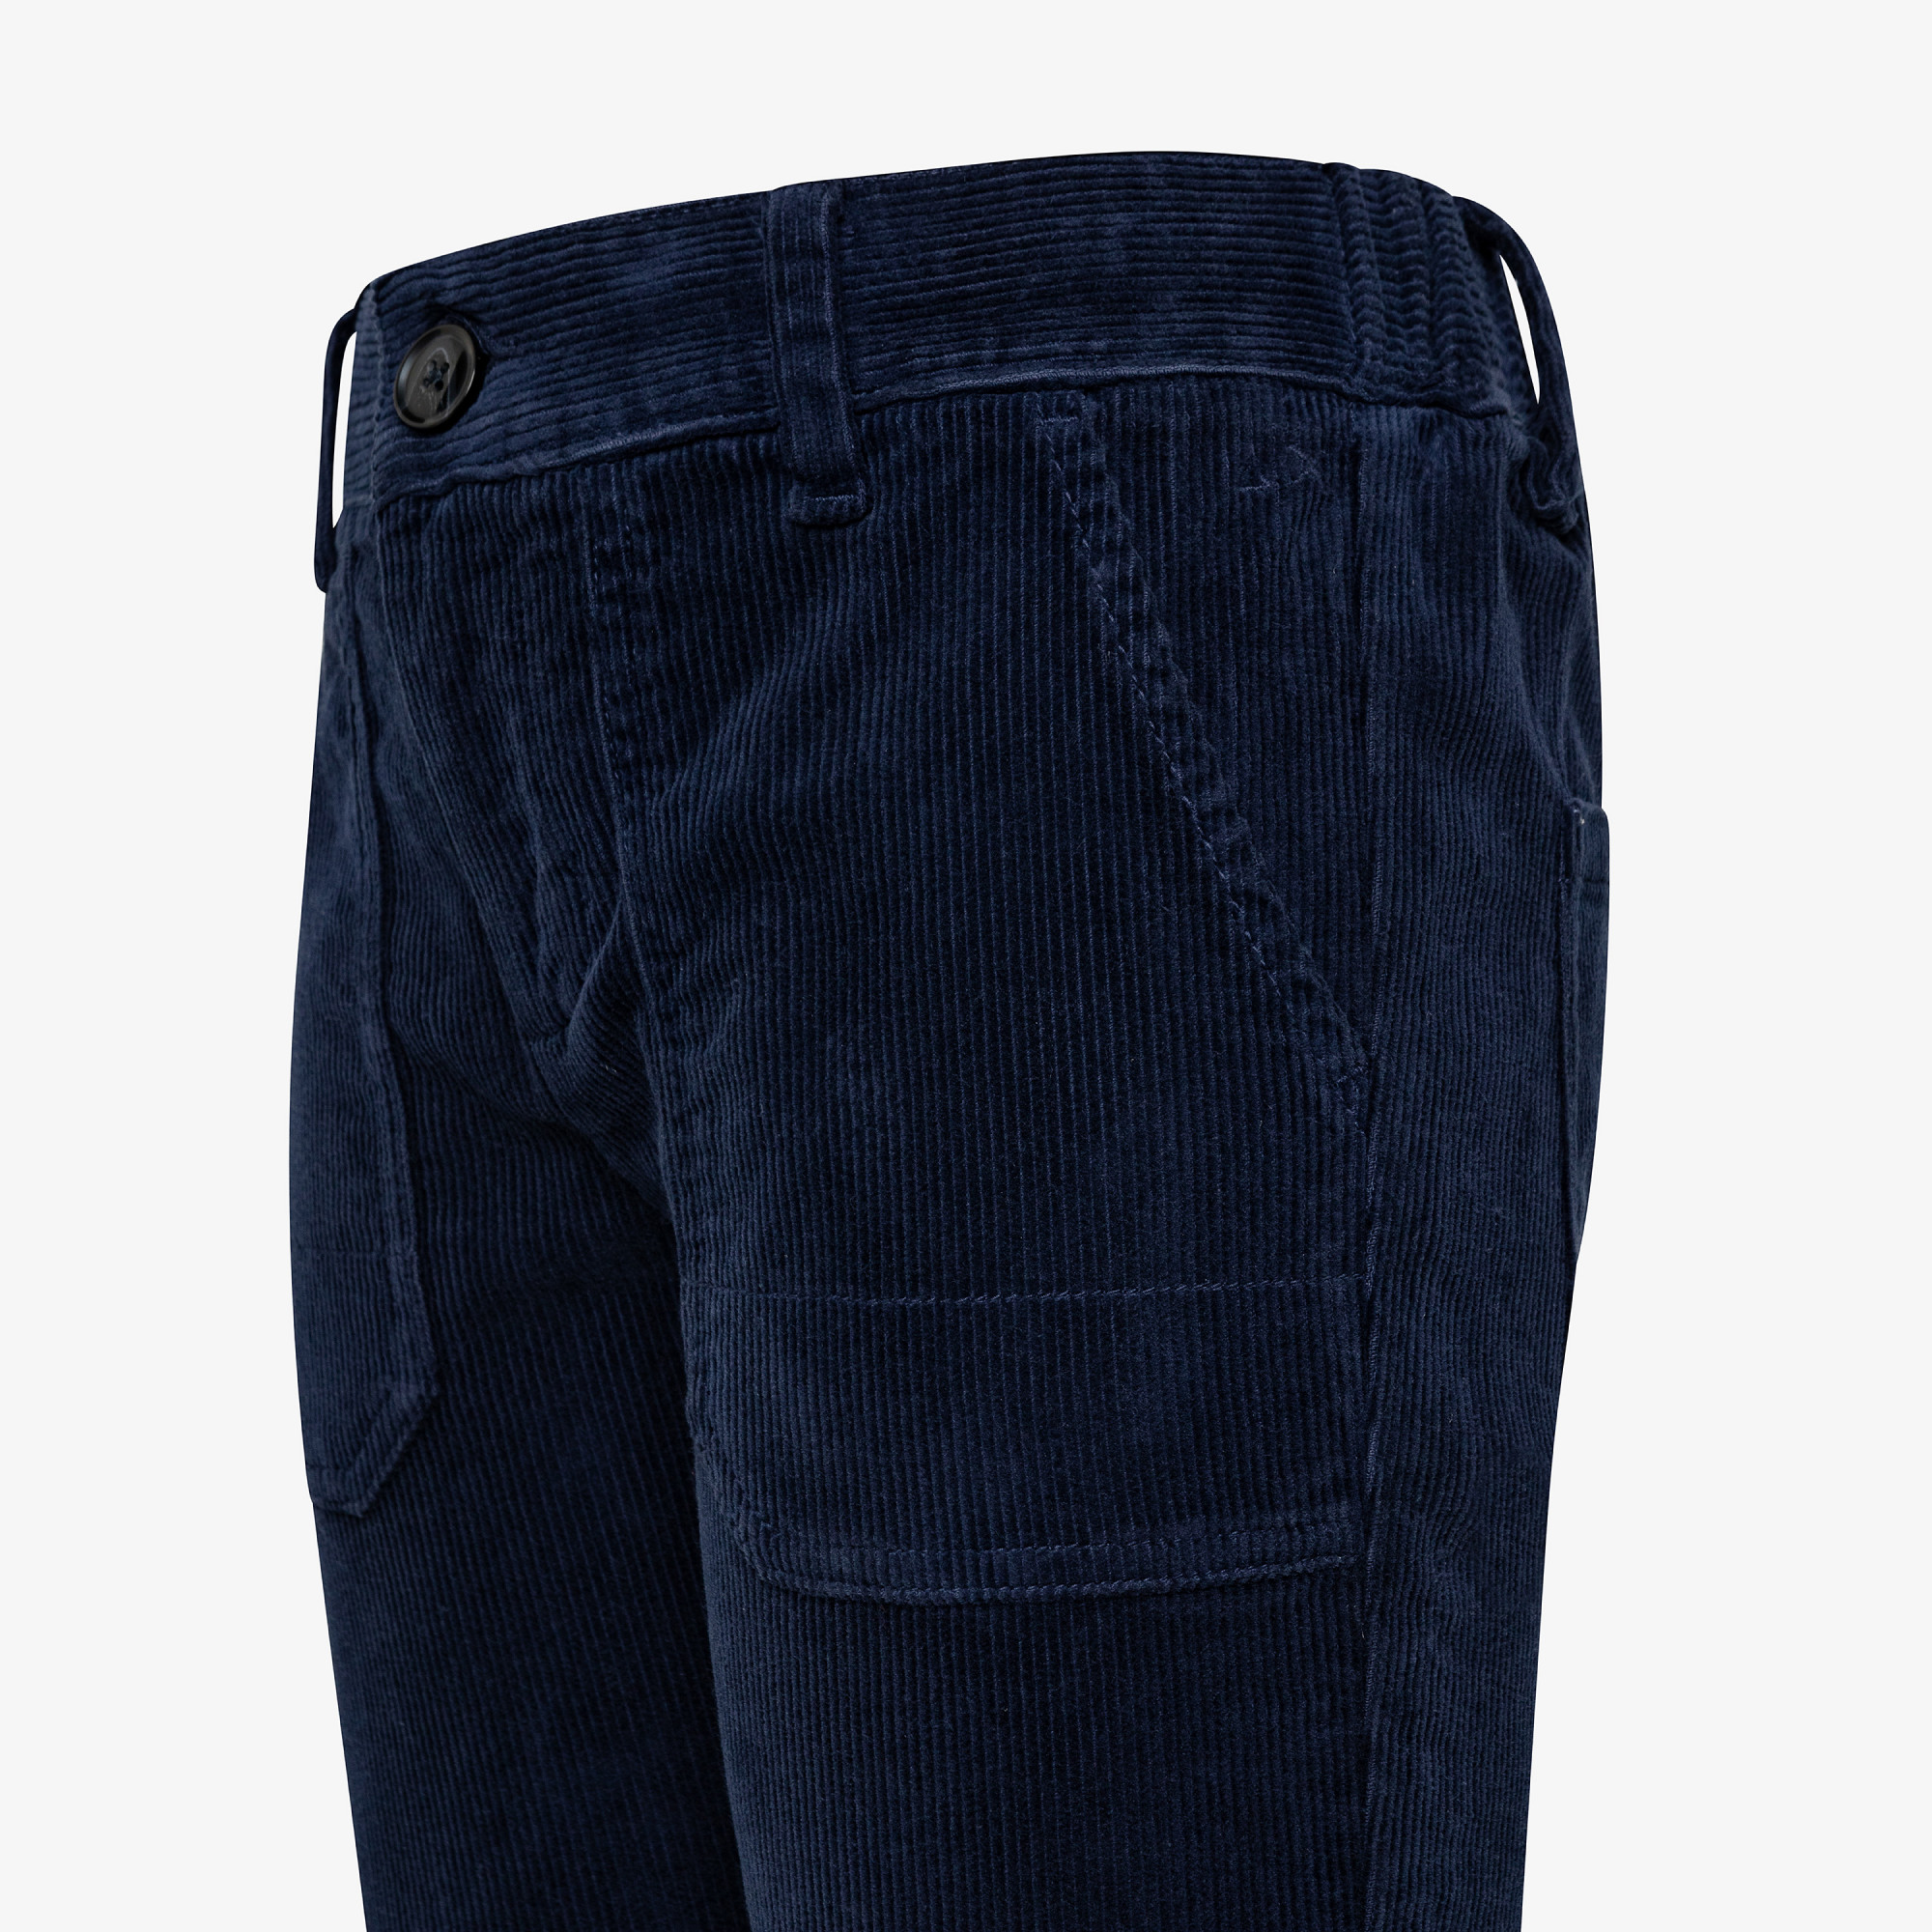 BOY'S PANT COULISSE CORDUROY NAVY BLUE